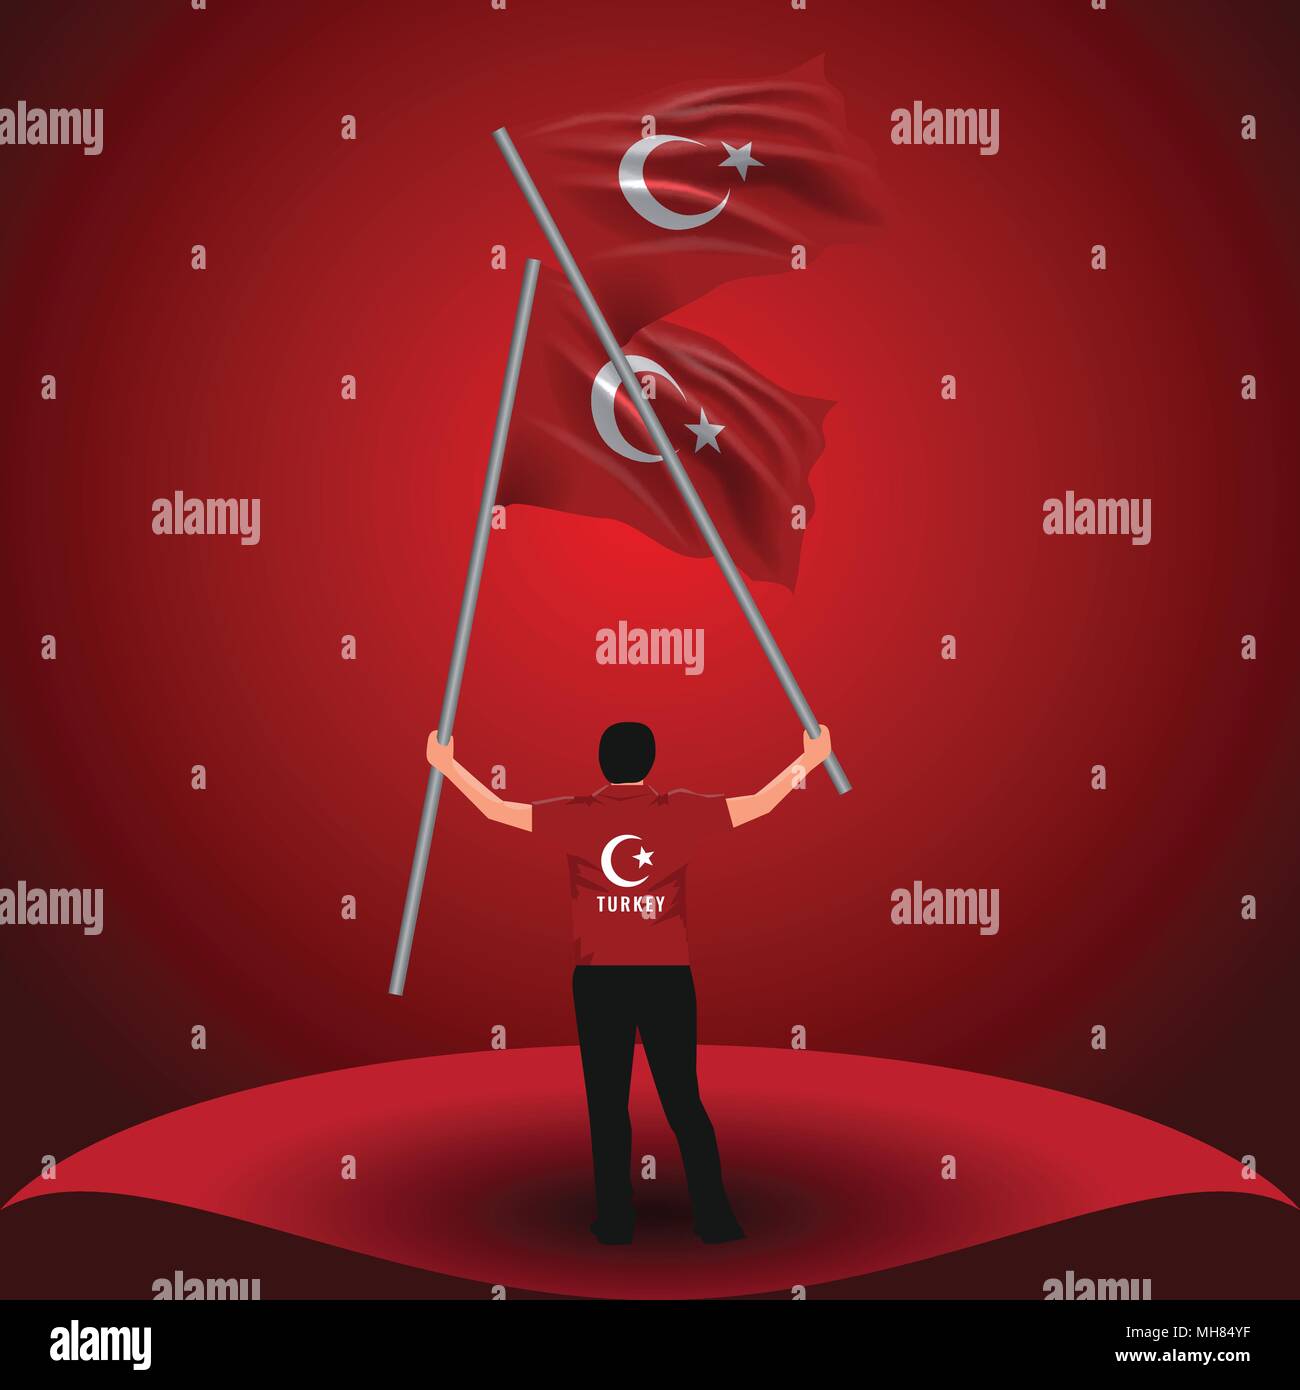 July 15, Democracy and National Unity Day vector drawing. Man holding two Turkish flags on his hand. Stock Vector